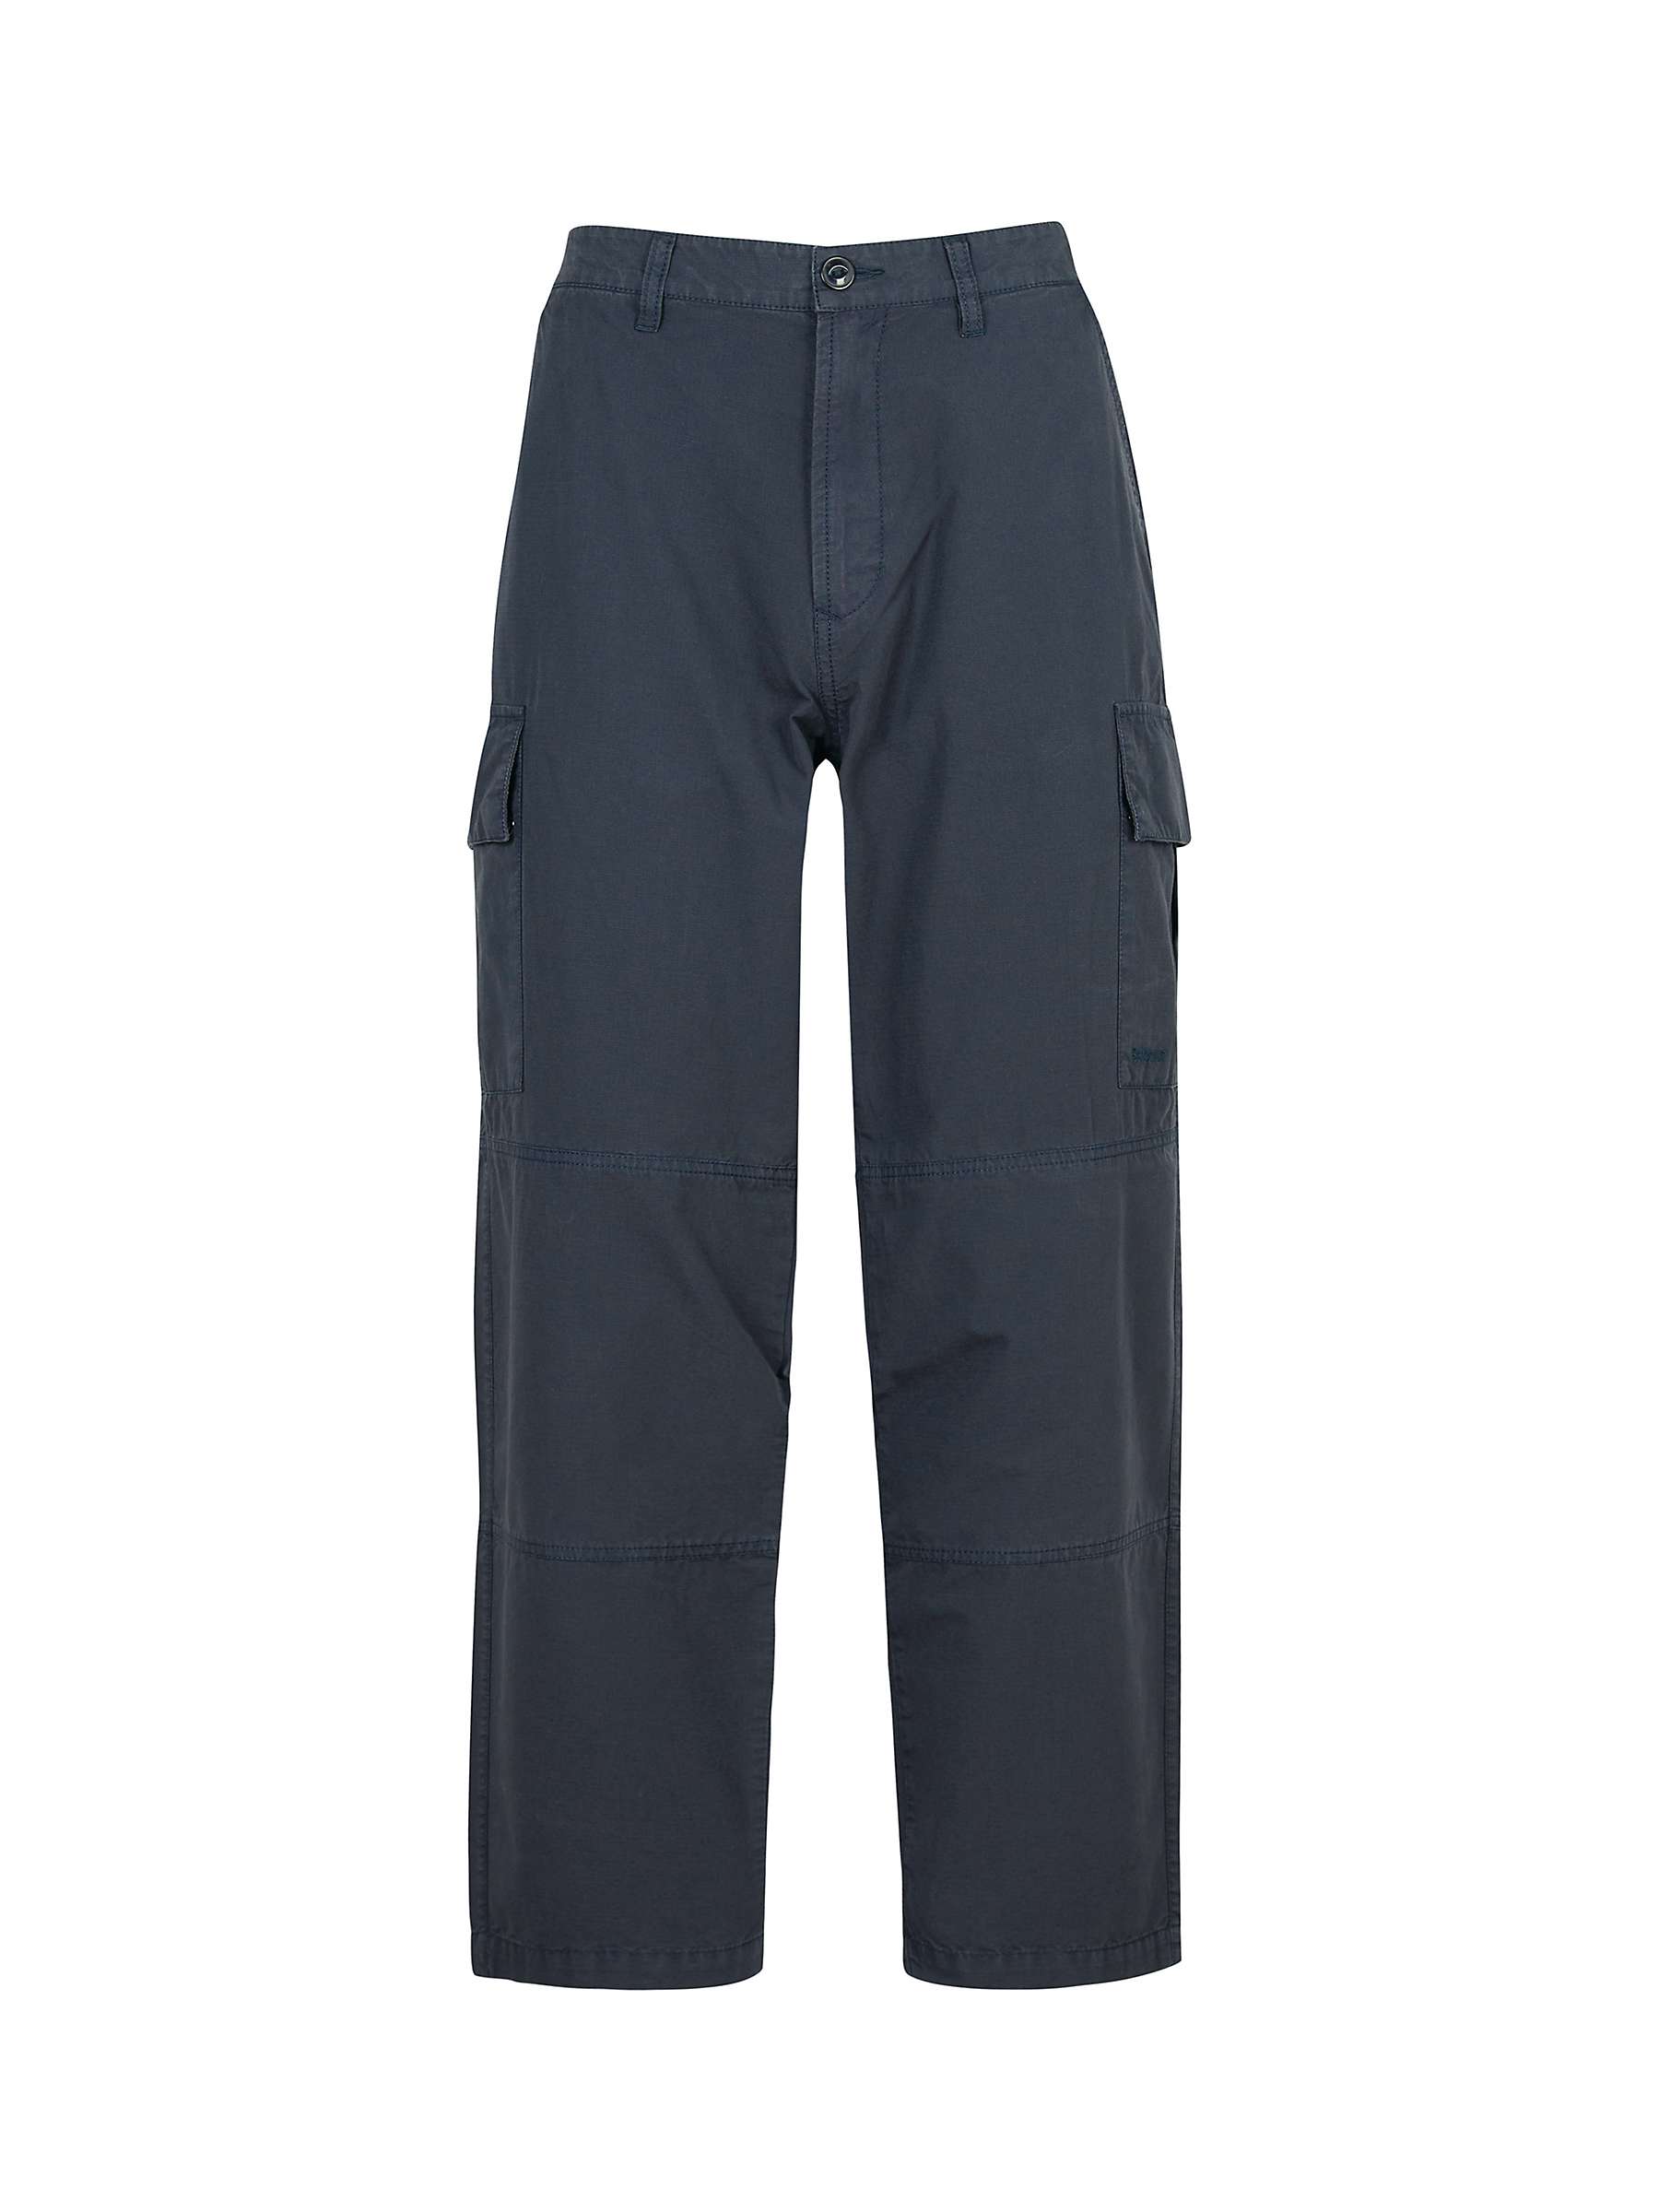 Buy Barbour Essential Ripstop Cargo Trousers, Navy Online at johnlewis.com